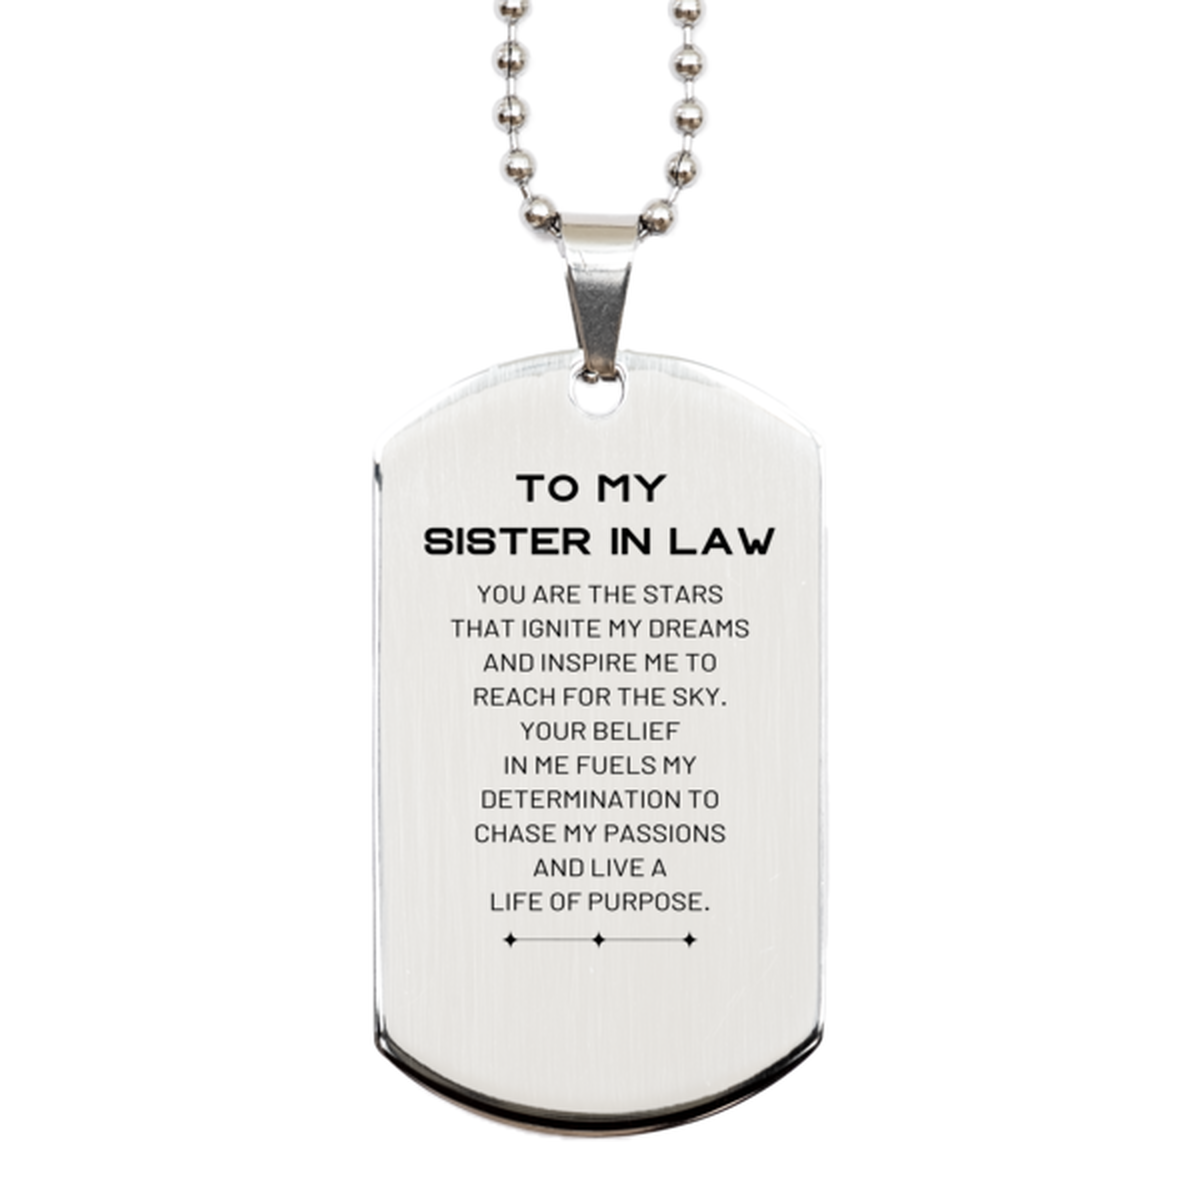 To My Sister In Law Silver Dog Tag, You are the stars that ignite my dreams and inspire me to reach for the sky, Birthday Unique Gifts For Sister In Law, Thank You Gifts For Sister In Law